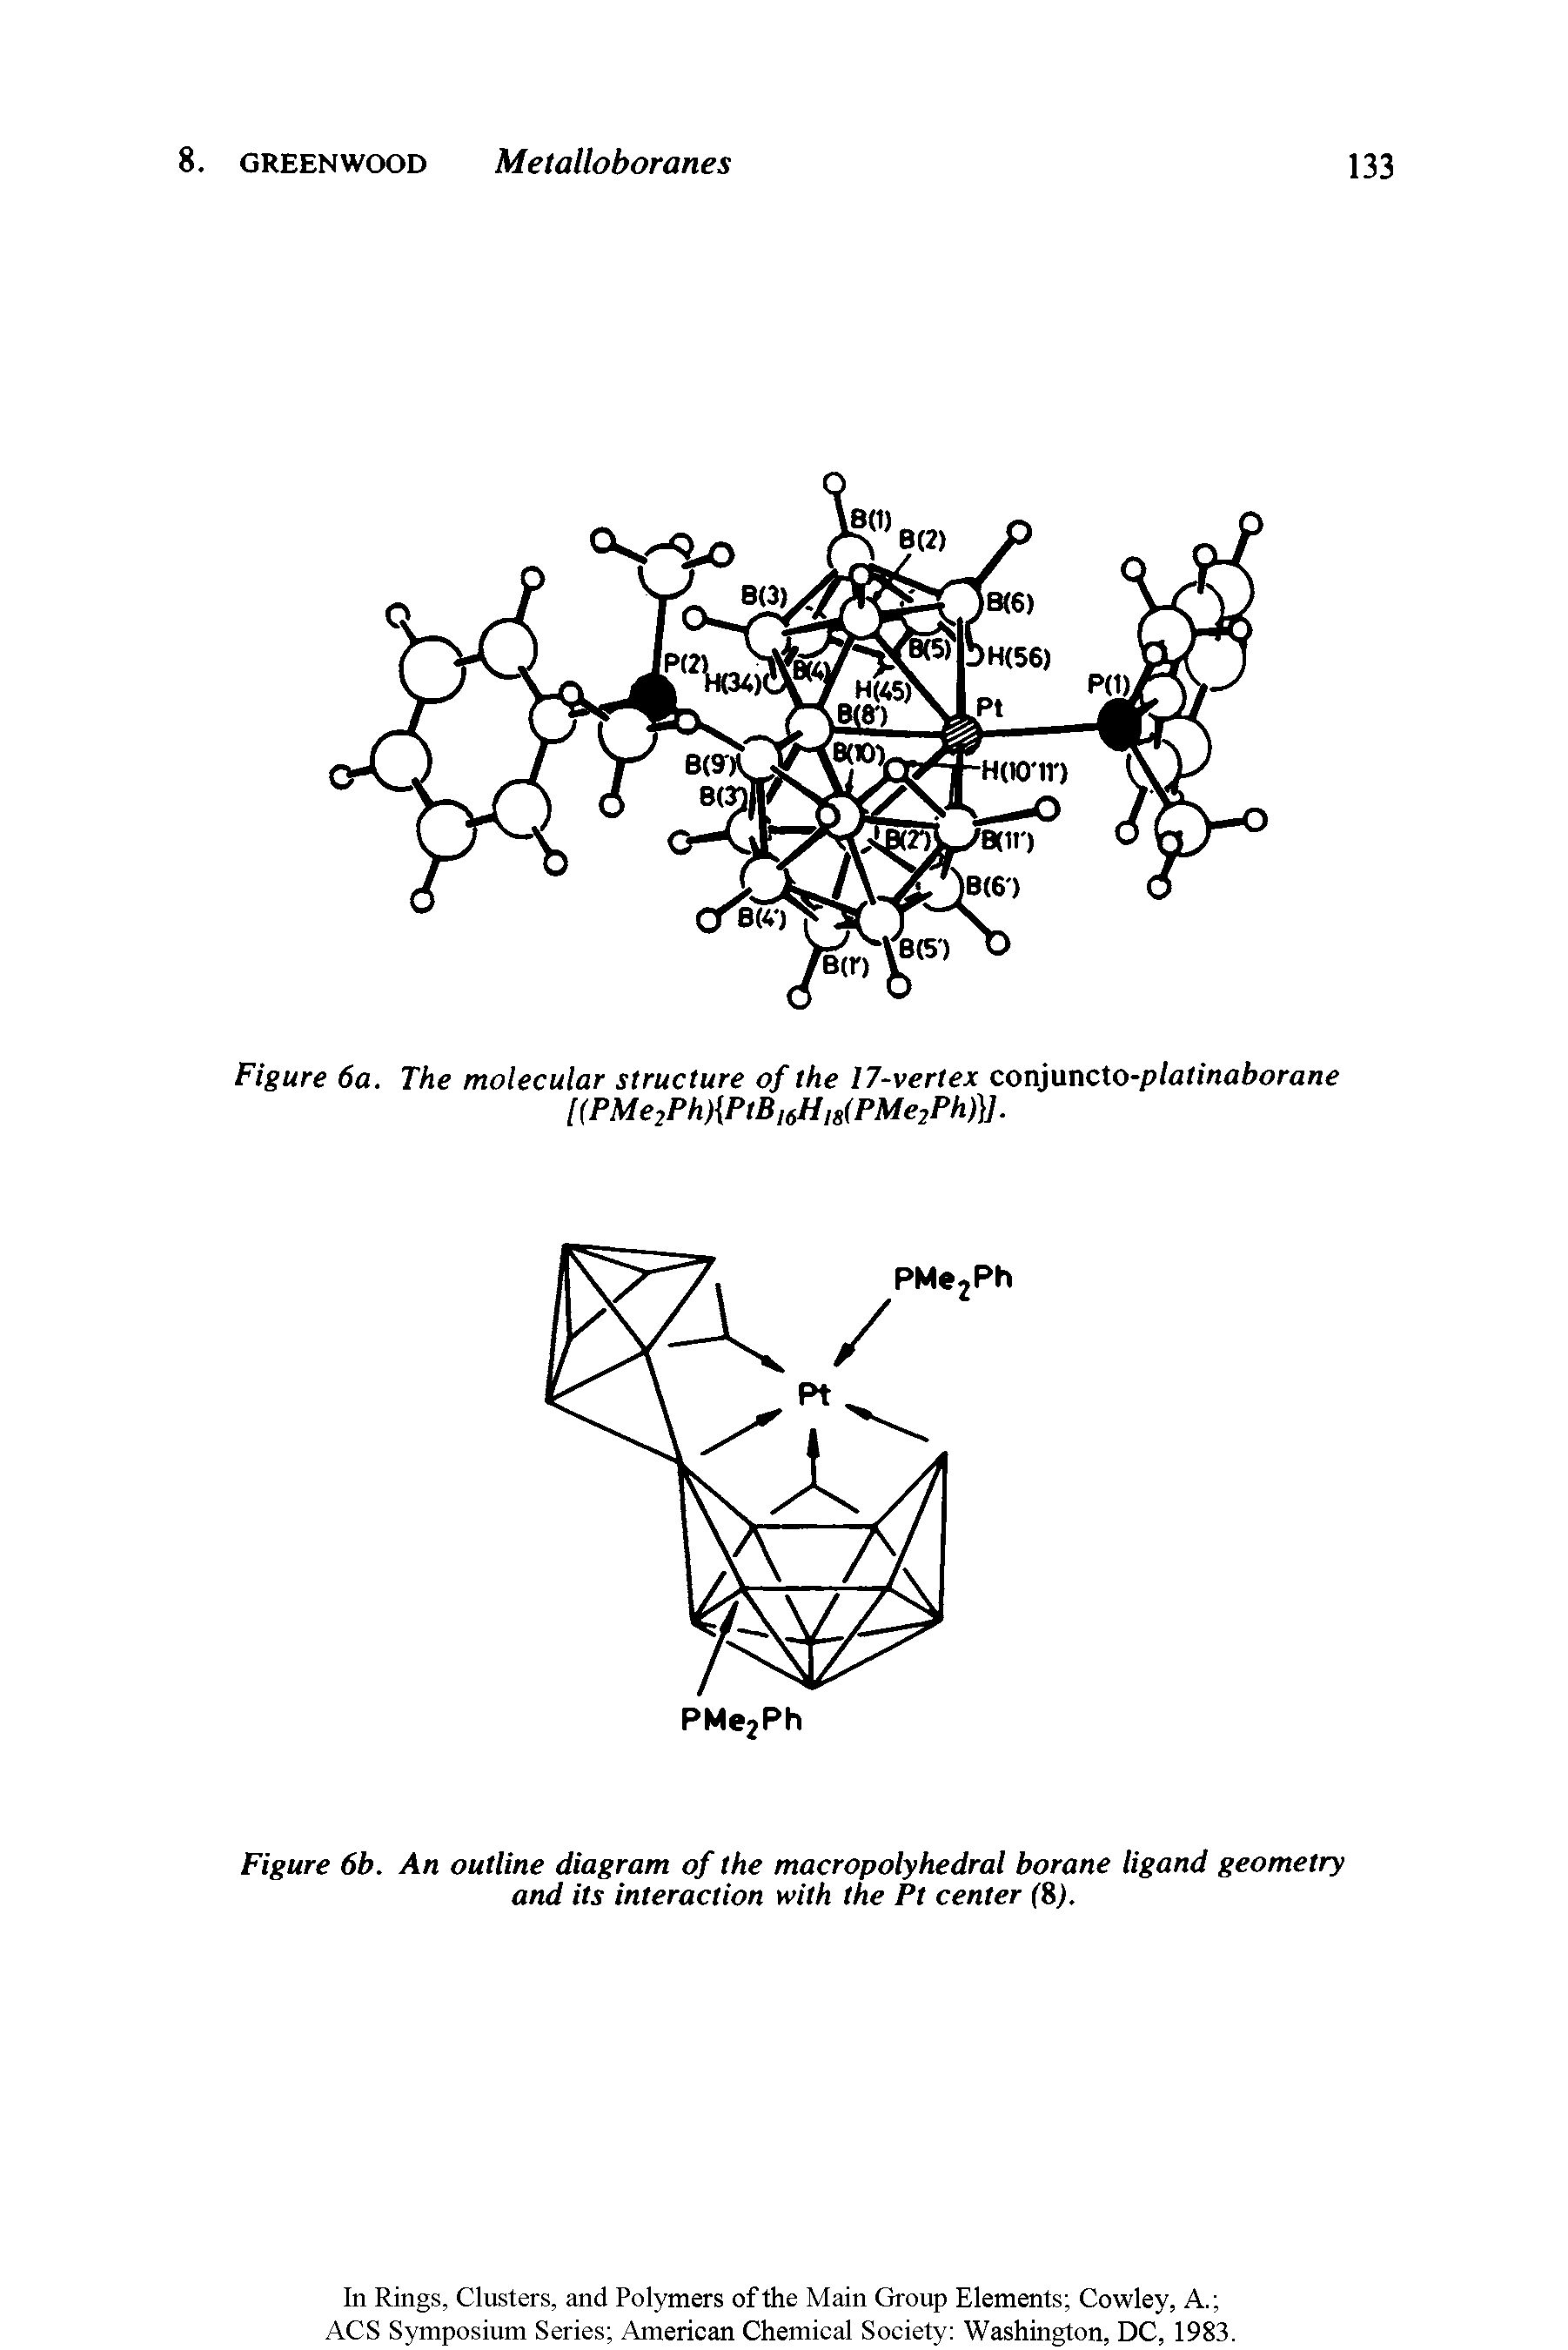 Figure 6b. An outline diagram of the macropolyhedral borane ligand geometry and its interaction with the Pt center C8j.